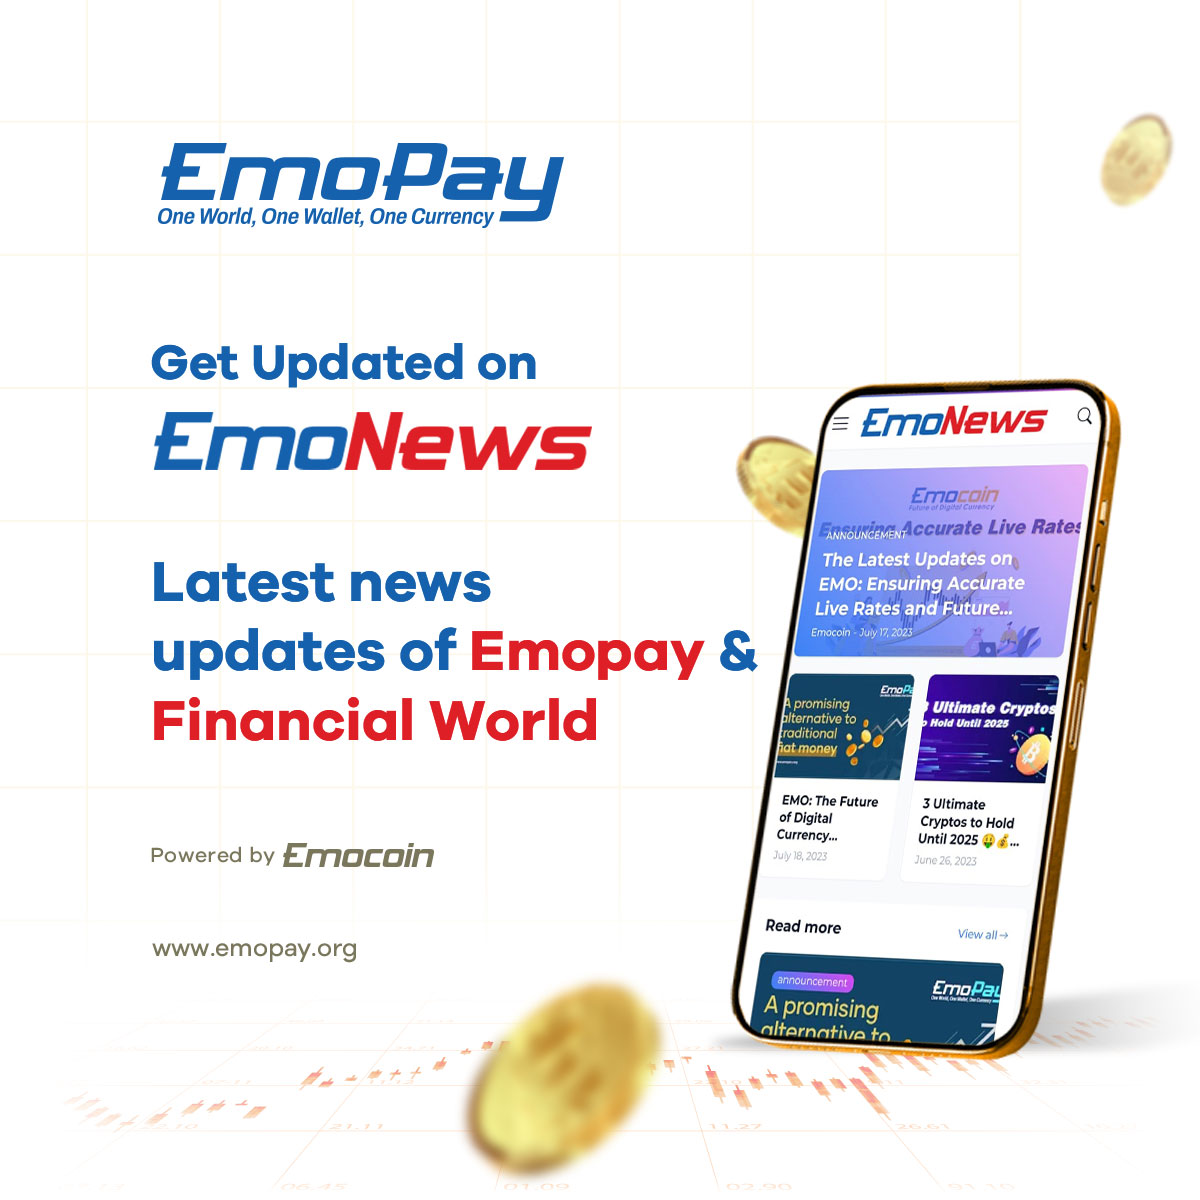 #Emonews is just a click away!🚀
Our user-friendly platforms ensure you stay informed wherever you go.🌐

Visit 👉🏻 emonews.digital

#FinancialUpdates #Crypto #StayInformed #Emopay #BreakingNews #Finance #innovation #Emocoin #article #cryptocurrency #insights #Analytics